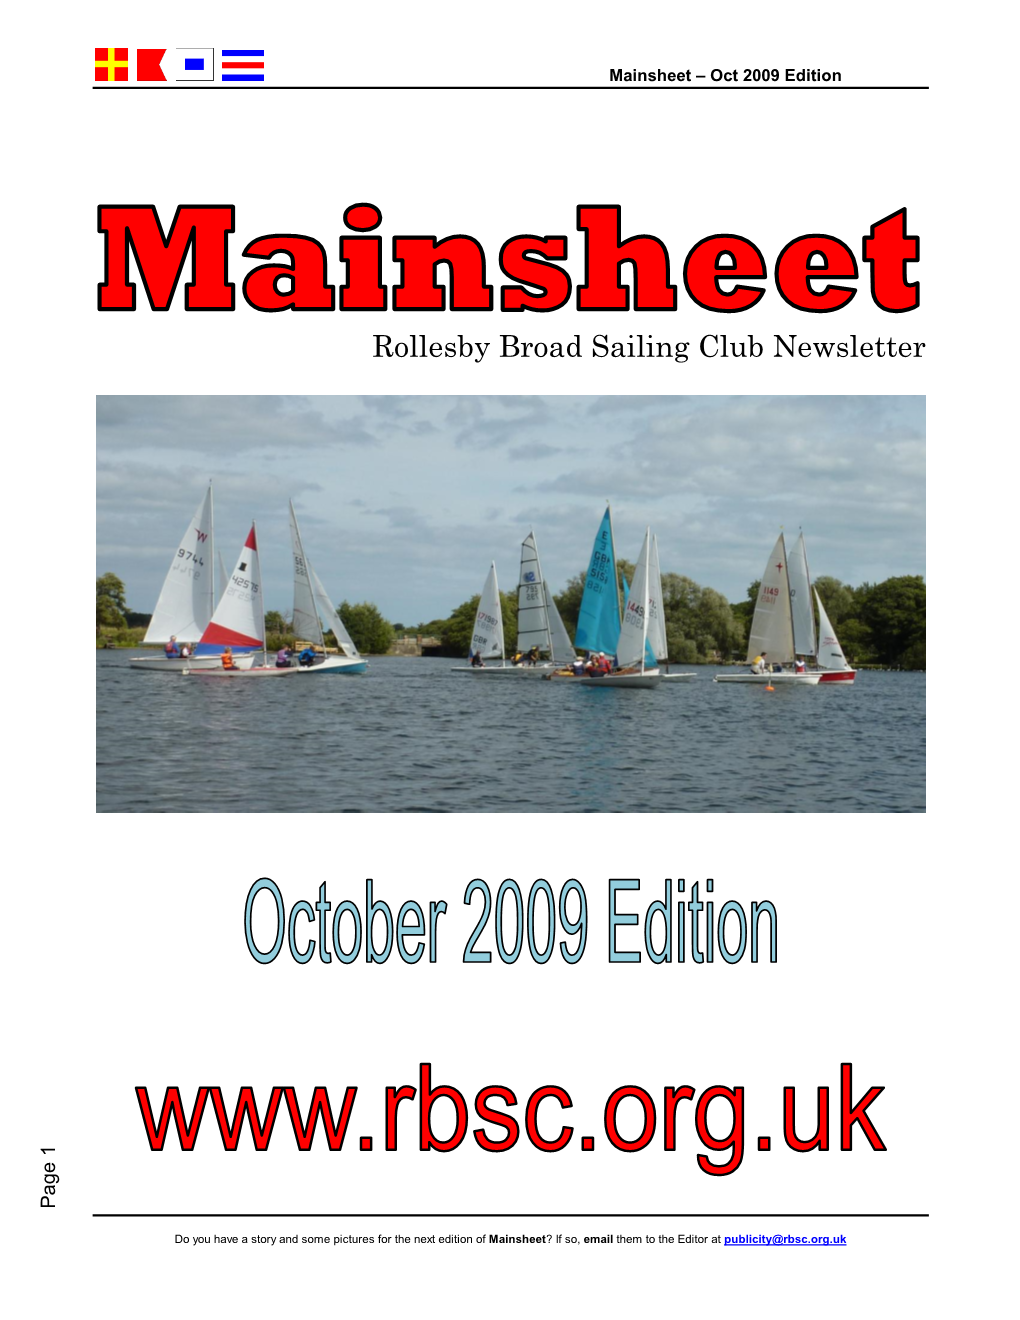 Rollesby Broad Sailing Club Newsletter